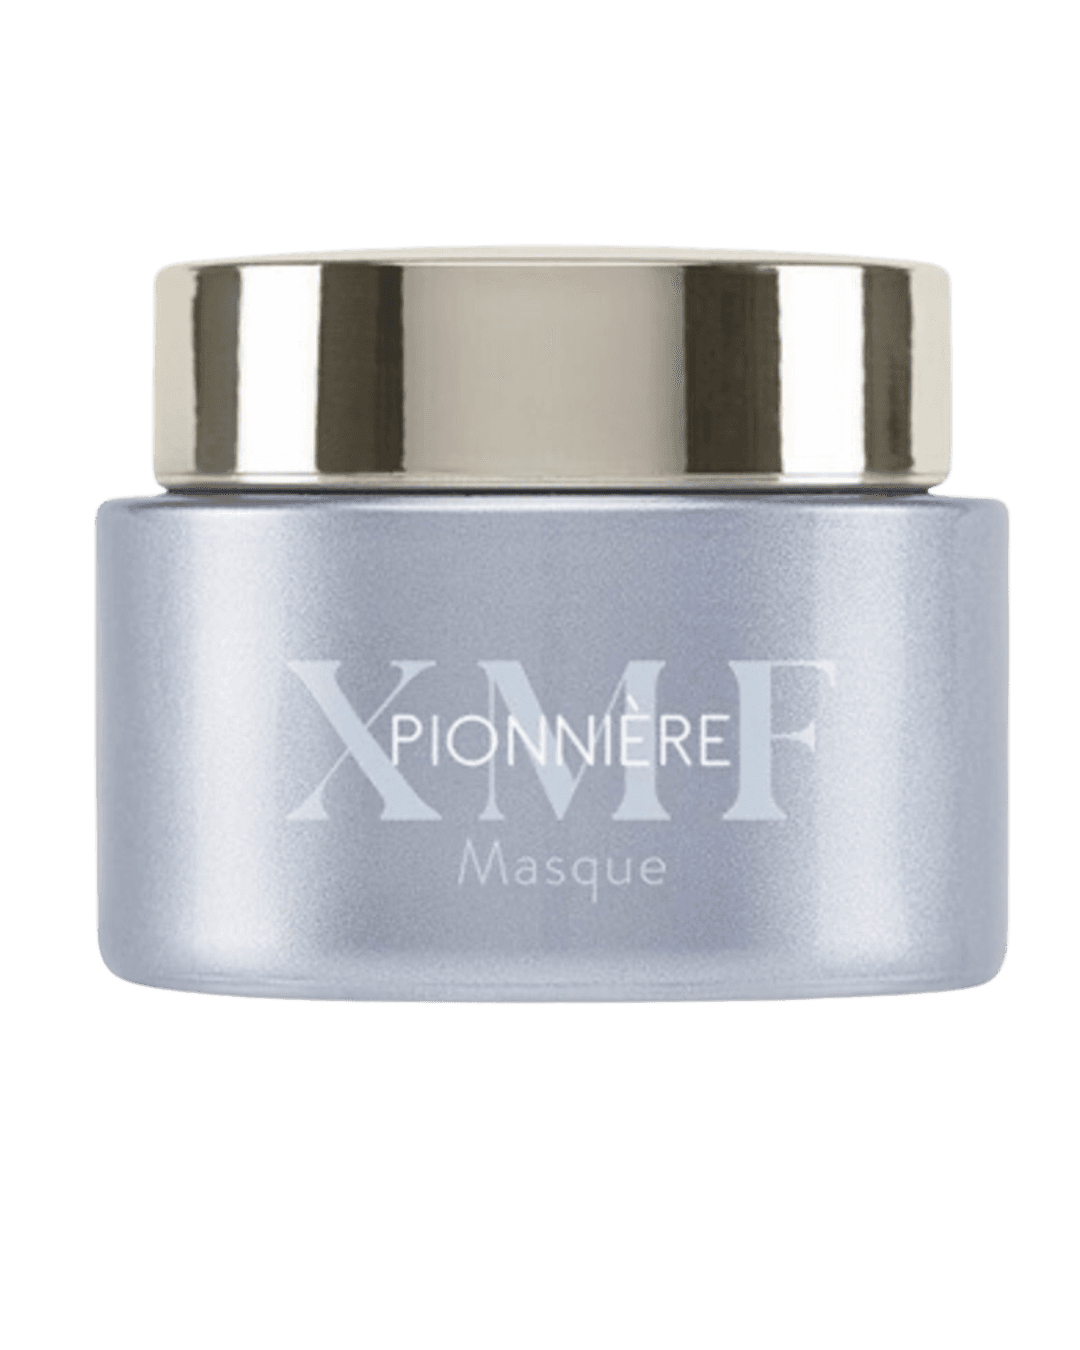 The Spa-Lon Phytomer PIONNIÈRE XMF Exfoliating  Mask-to-Oil